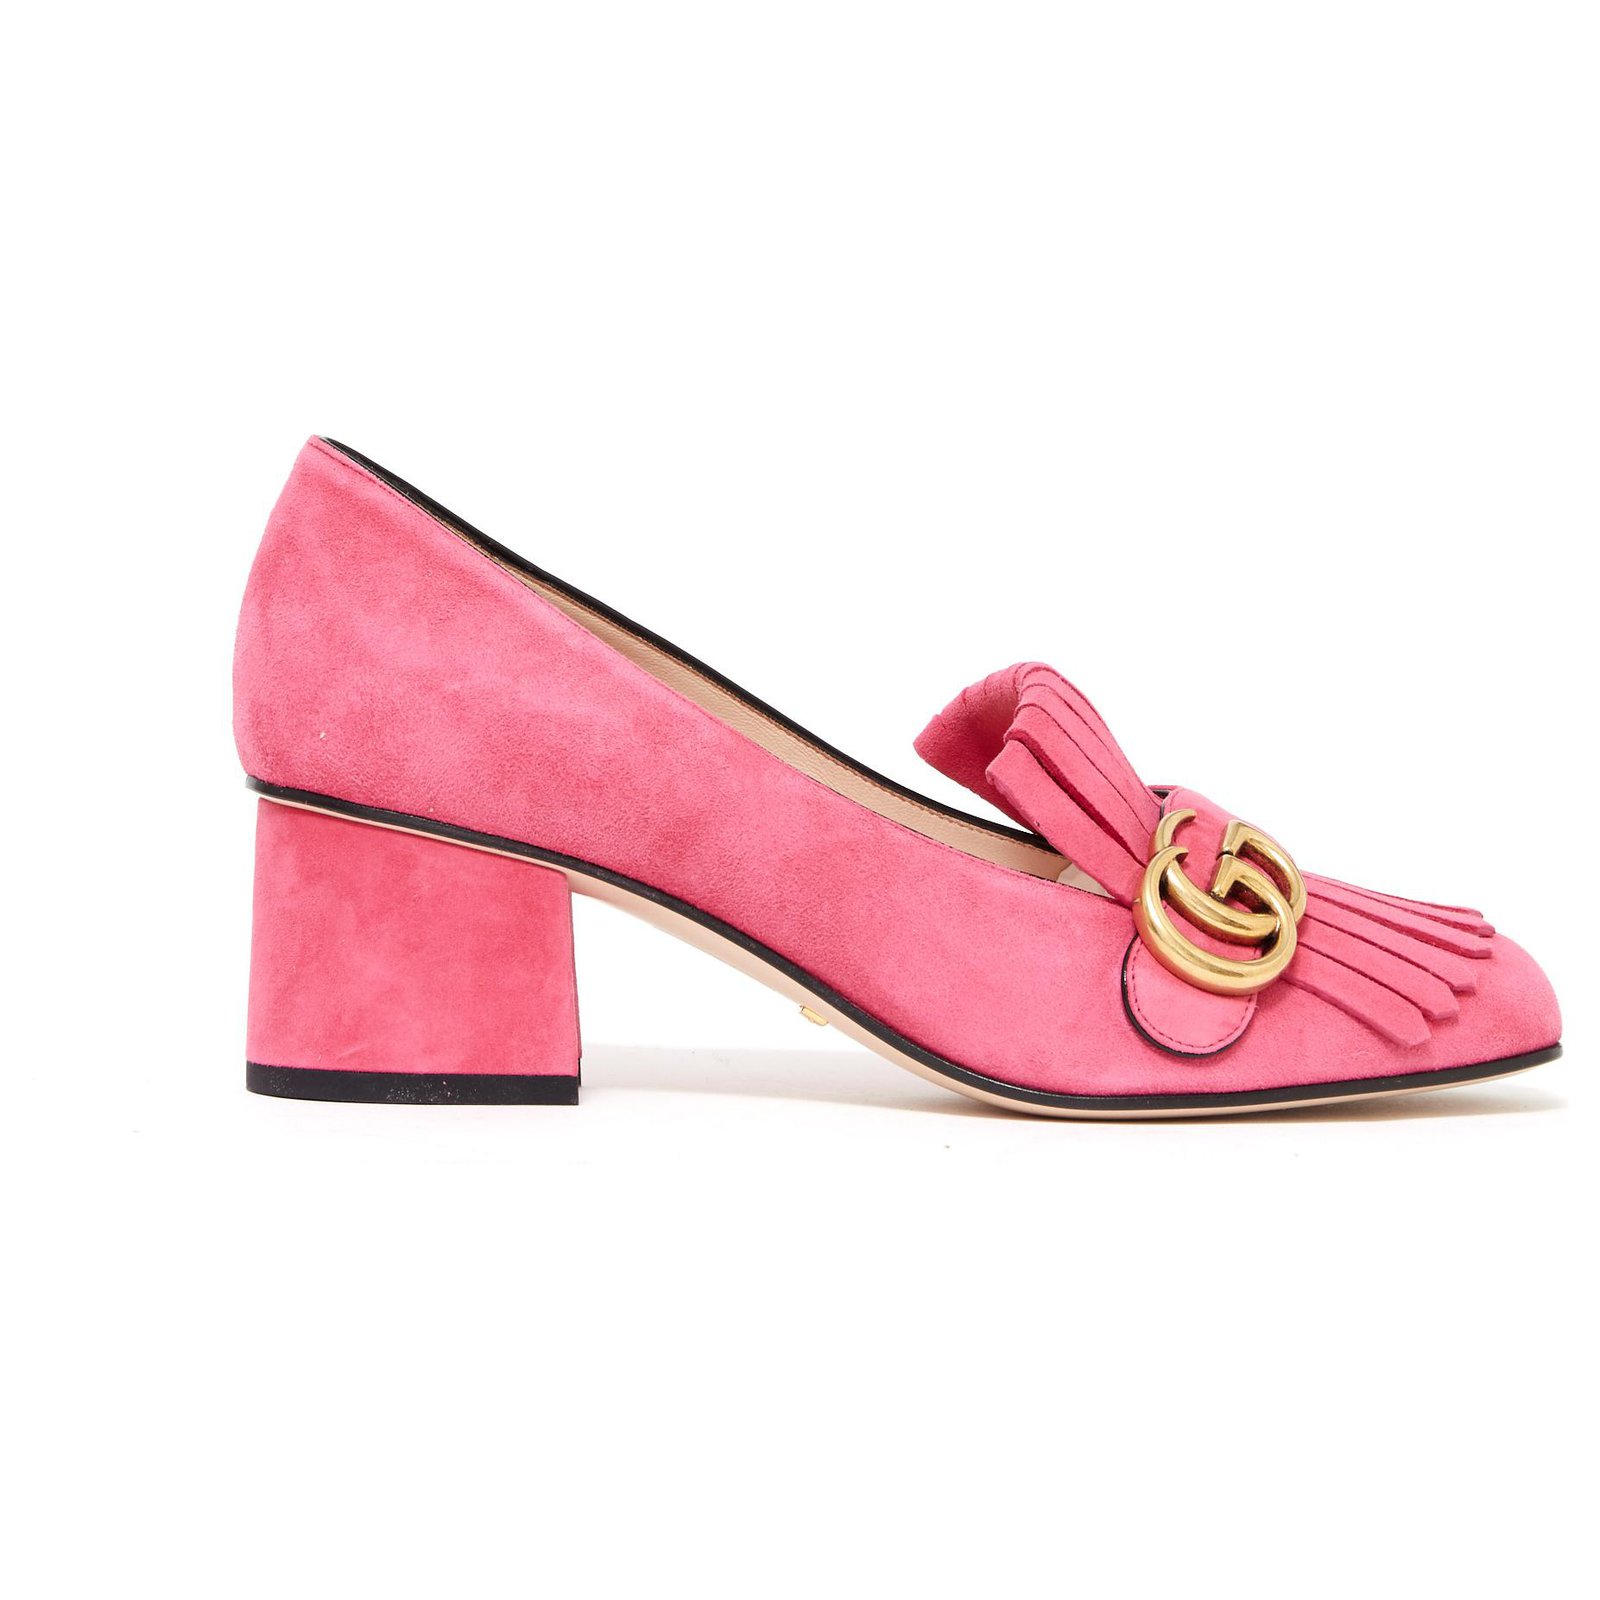 Gucci MARMONT EU38 PINK SUEDE NEW Flats 